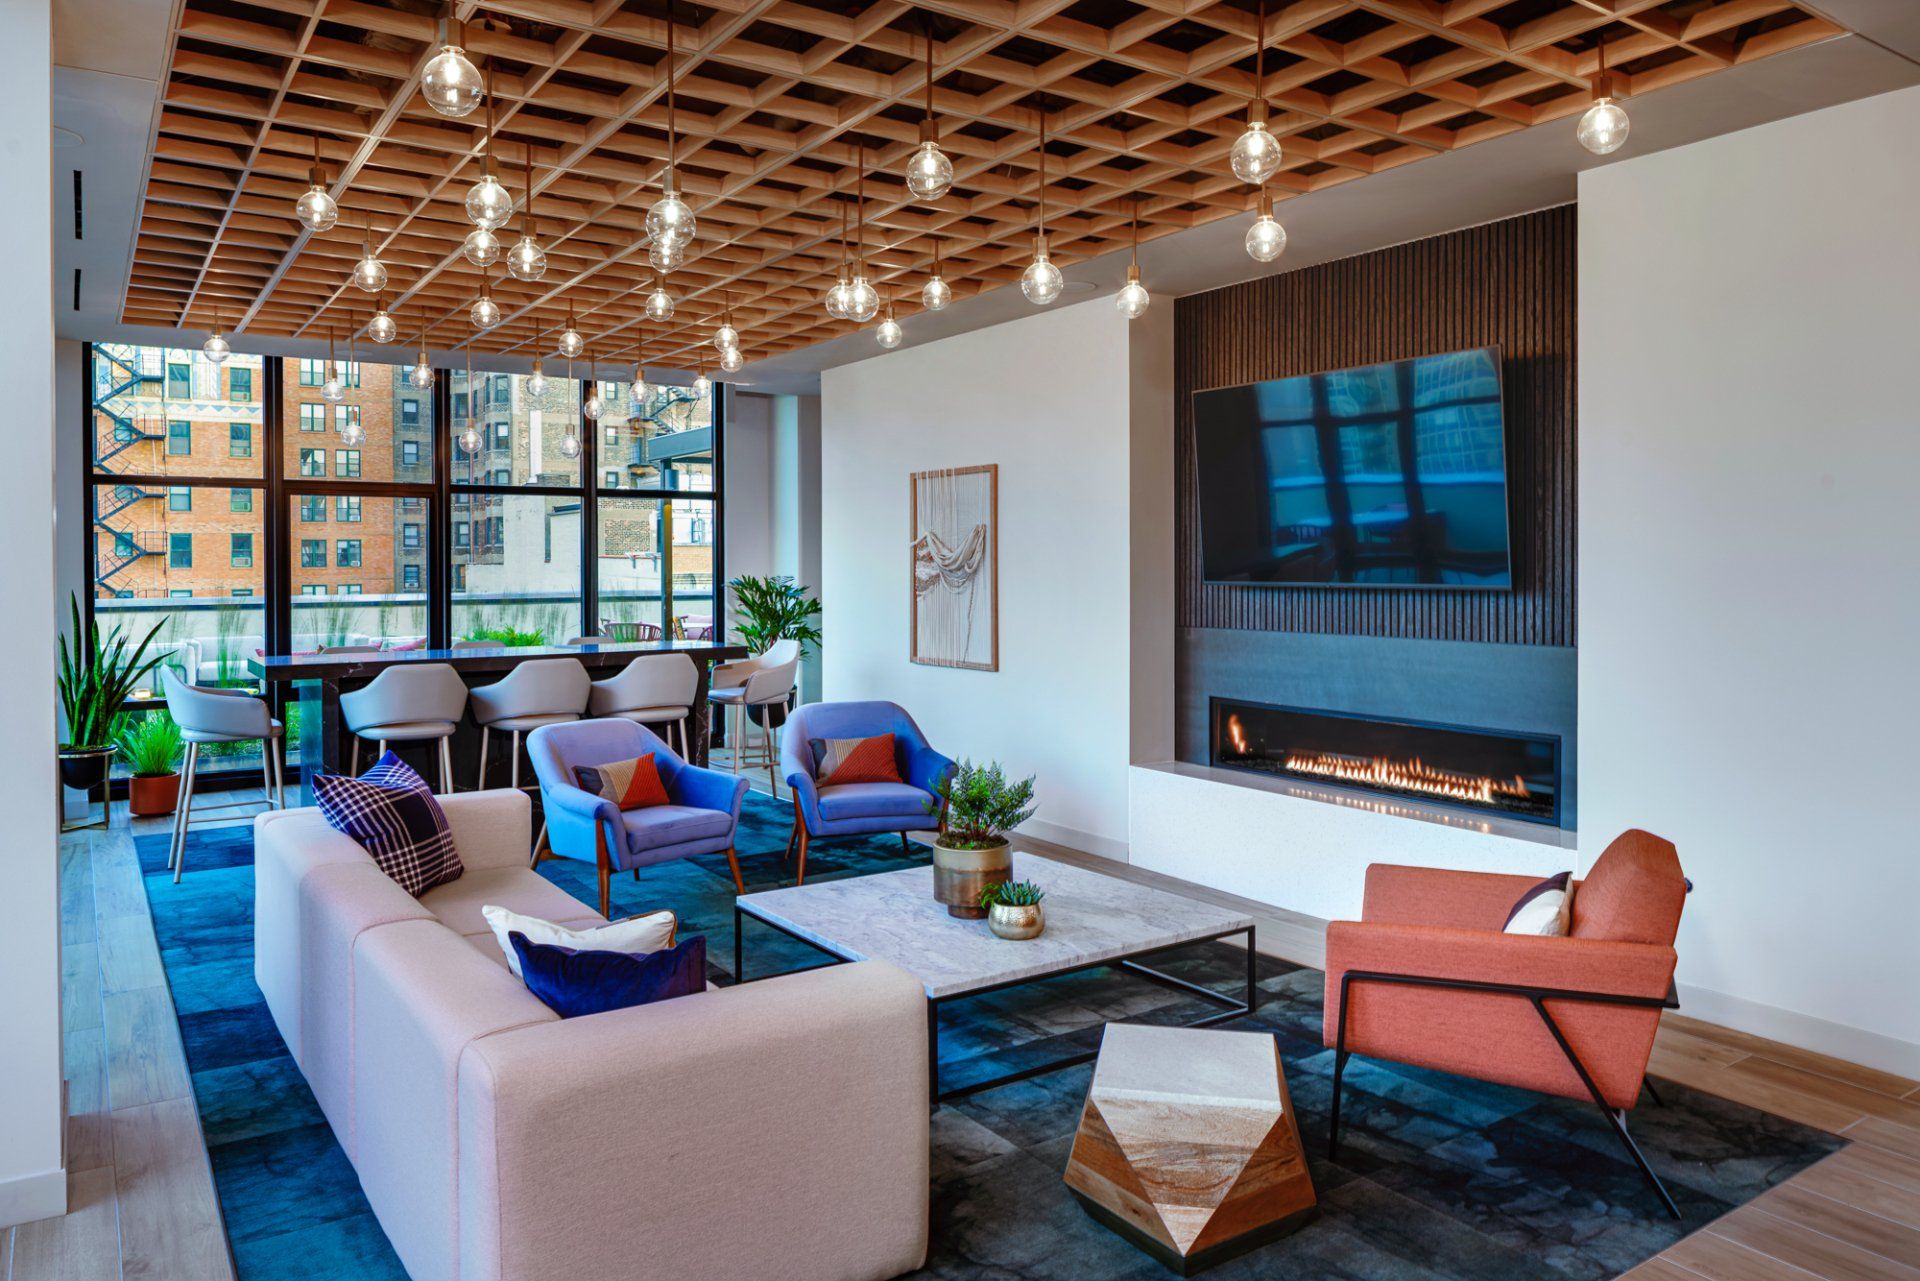 Clubhouse with wood ceiling, designer lighting, sofa, rug, and fireplace at Gild Apartment.